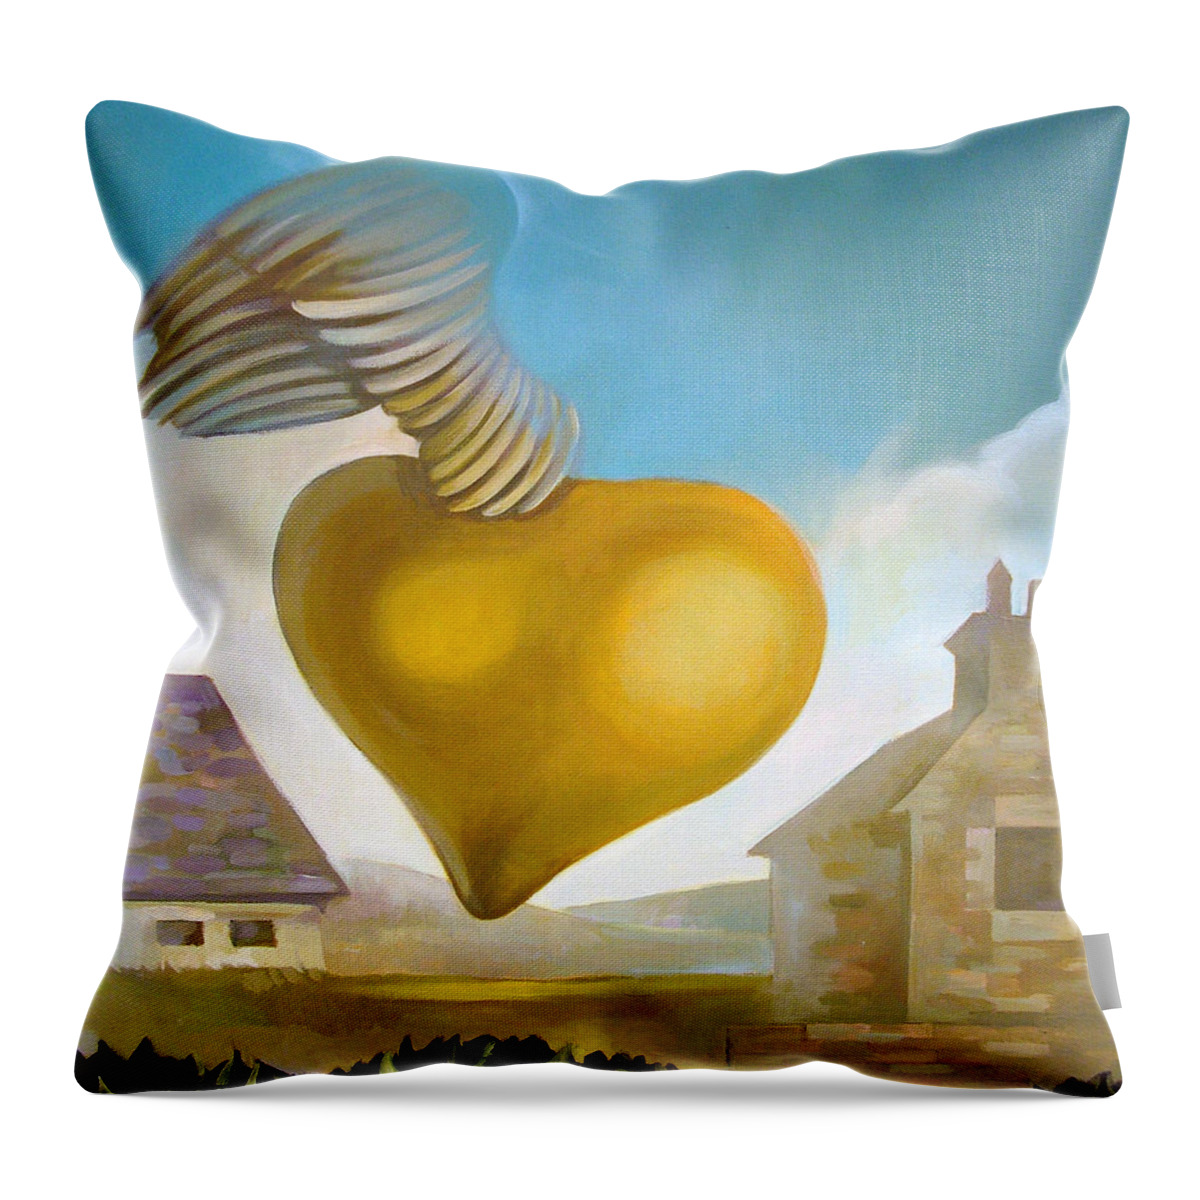 Wings Throw Pillow featuring the painting Norman Heart by Filip Mihail